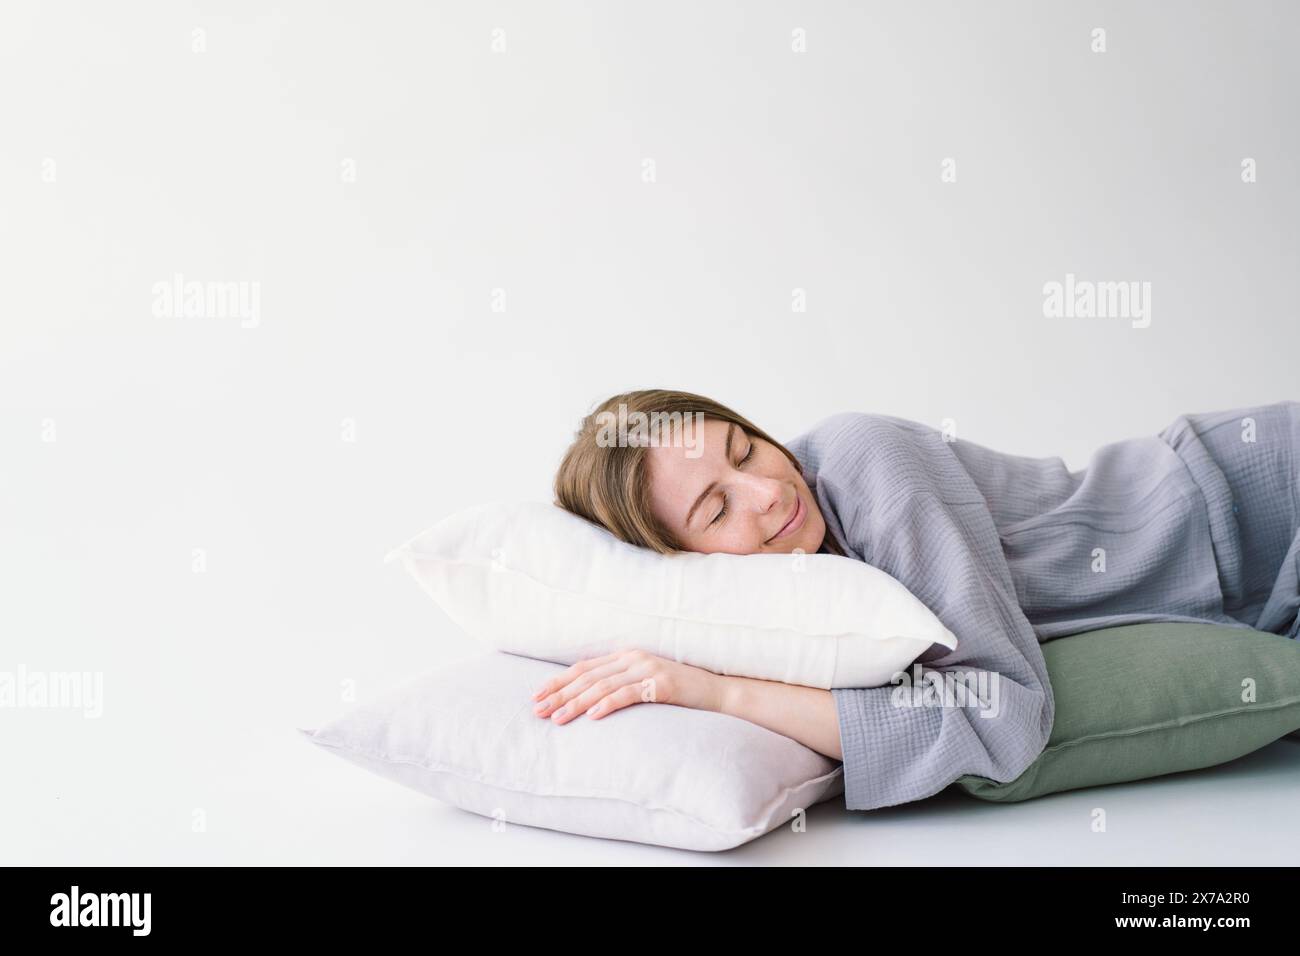 Serene Woman Resting Peacefully With White Pillow on a Light Background Stock Photo